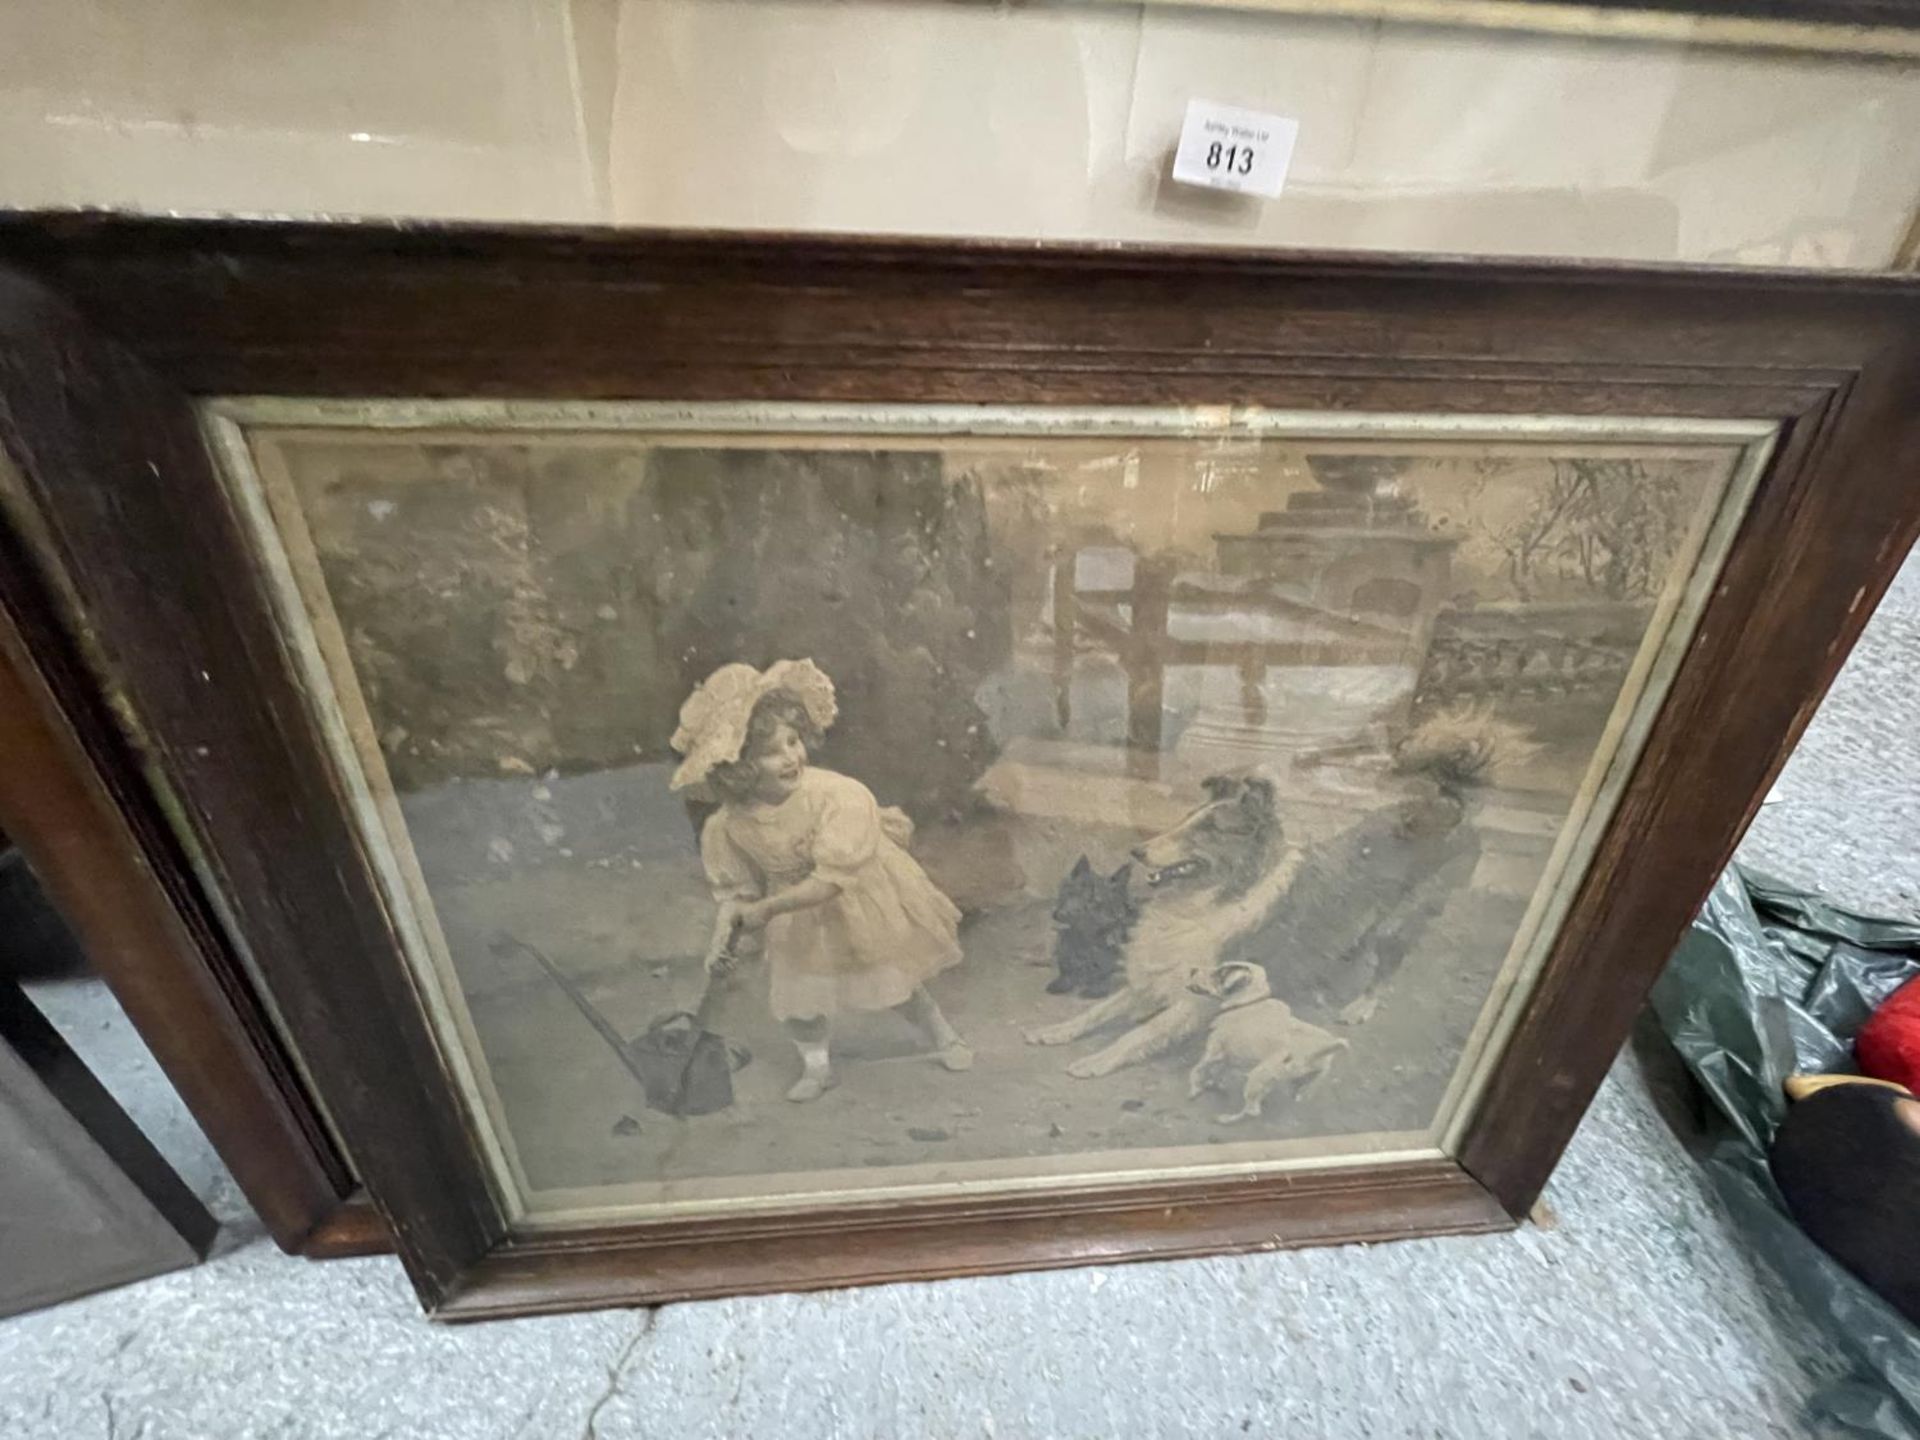 THREE WOODEN FRAMED VICTORIAN STYLE SEPIA PRINTS DEPICTING CHILDREN AND ANIMALS - Image 2 of 4